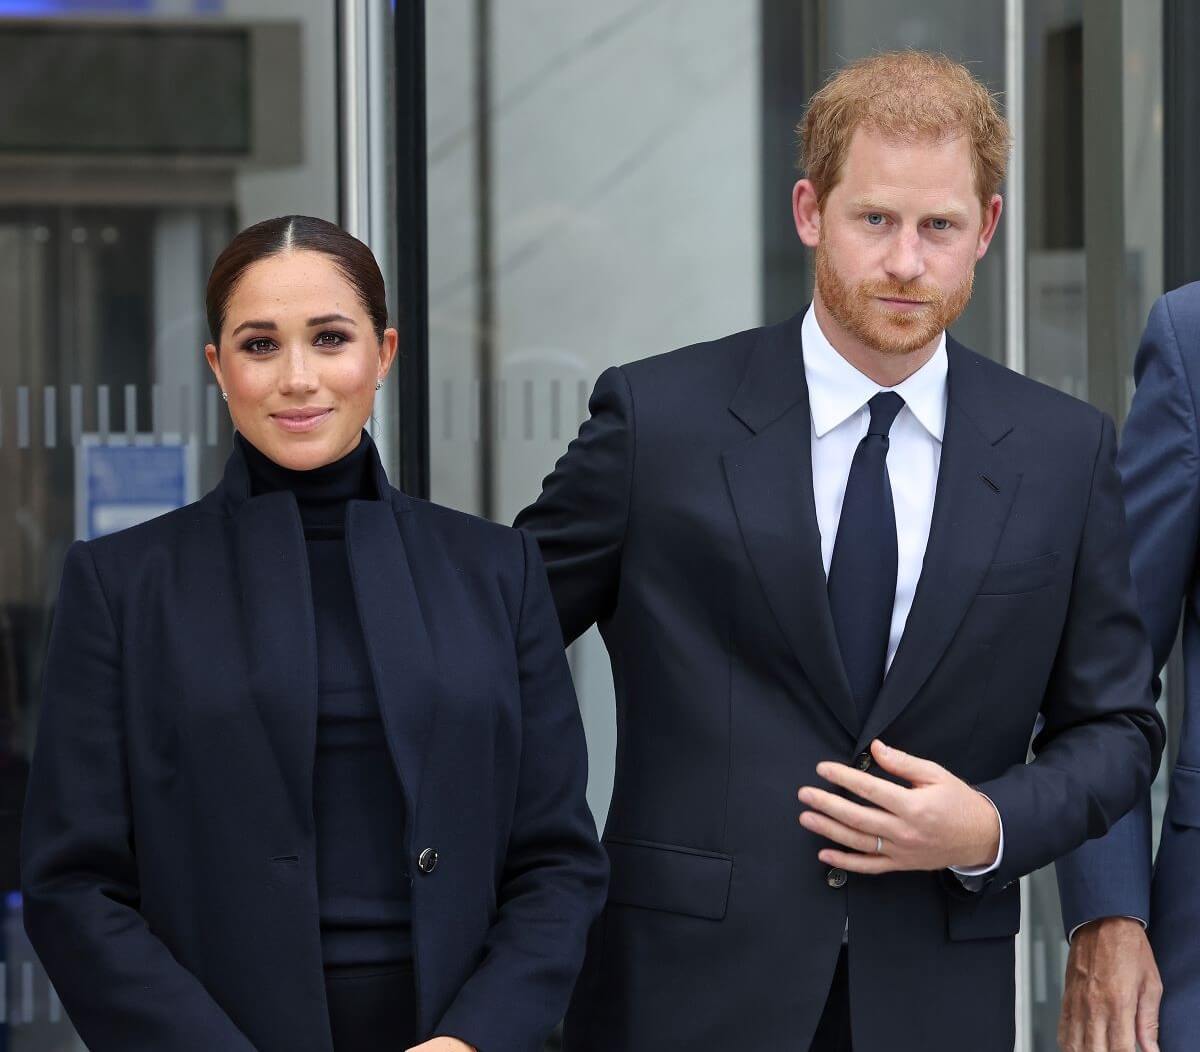 Prince Harry and Meghan Have ‘Difficult Year’ Ahead as Duchess’s Desire to Return to Acting Puts Strain on Their Marriage, Expert Predicts